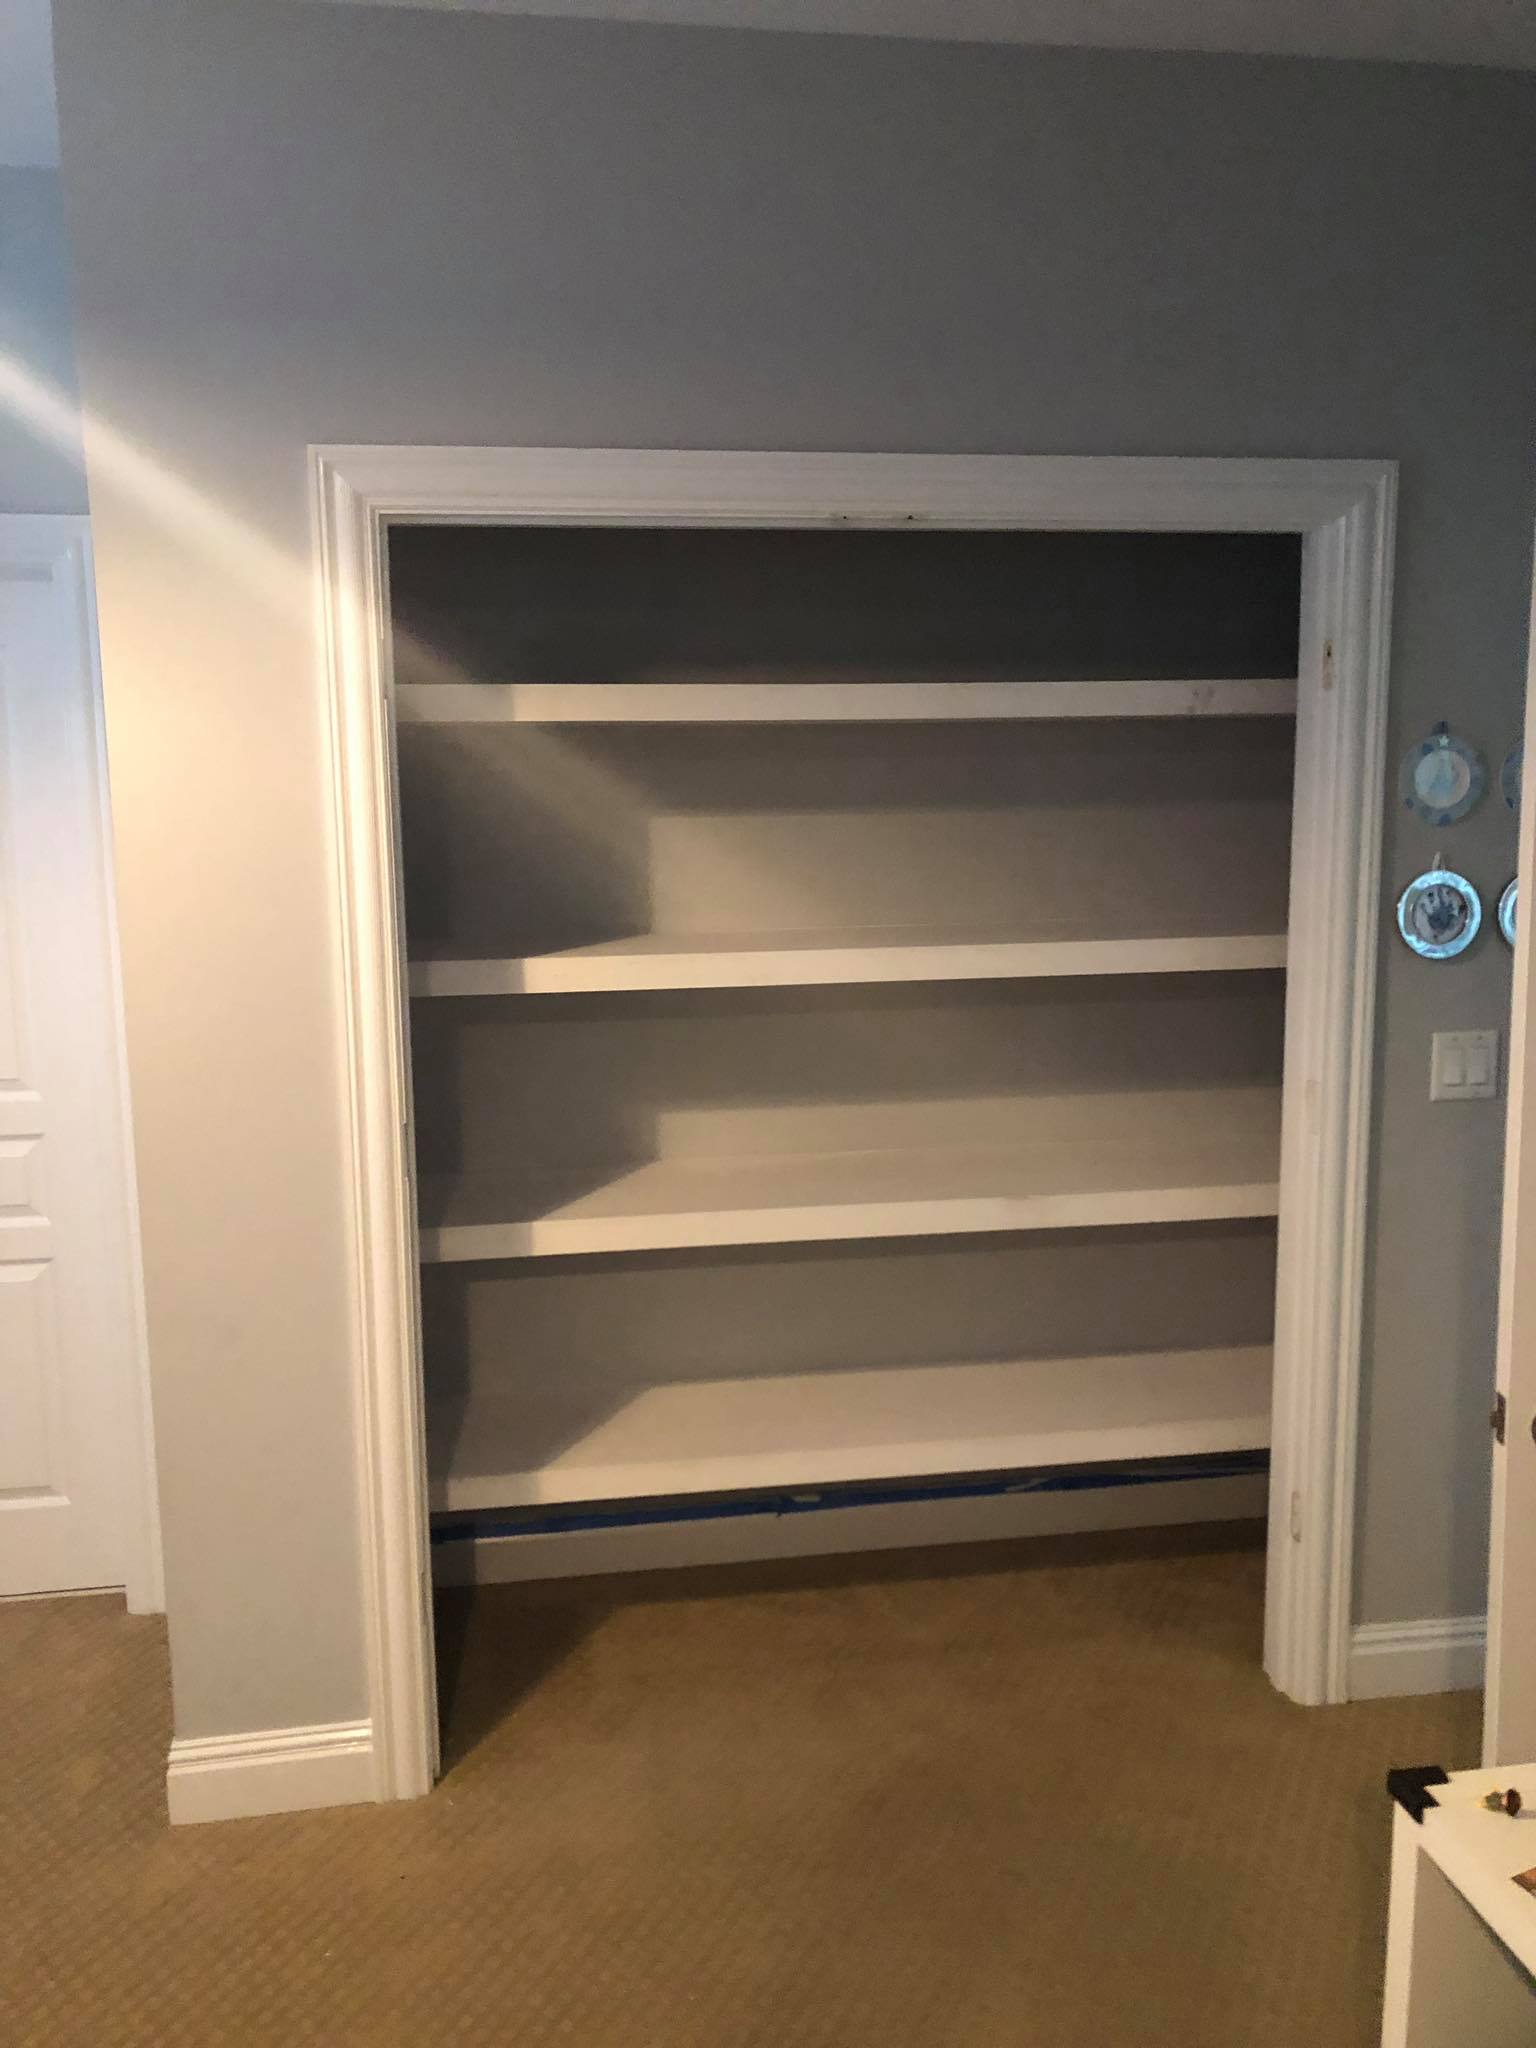 Closet Space Floating Shelves Installed Painted White with Trim